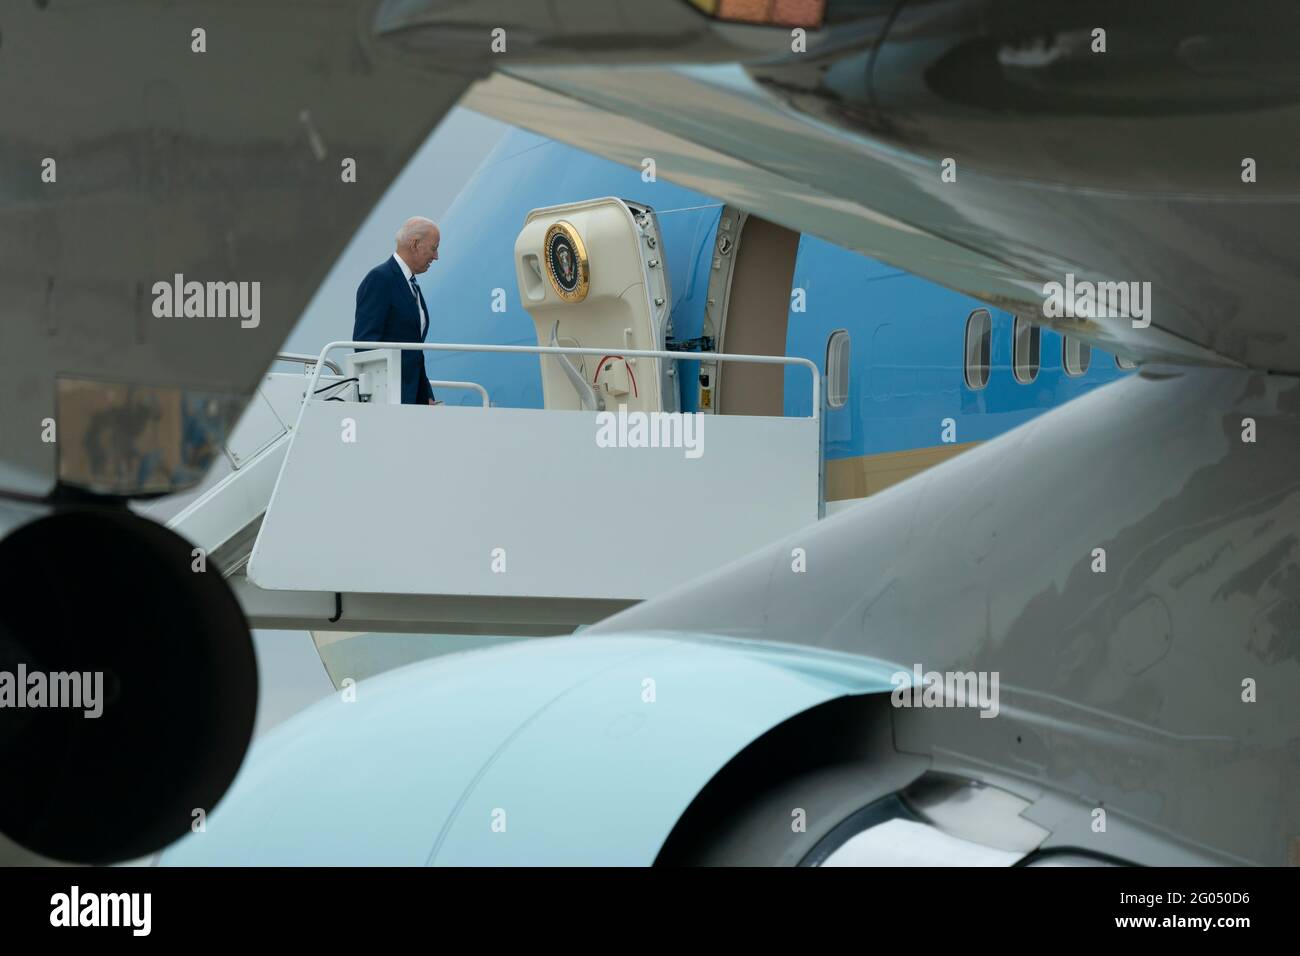 United States President Joe Biden boards Air Force One at Joint Base Andrews, to make remarks at Joint Base Langley-Eustis in Virginia, Friday, May 28, 2021. Credit: Chris Kleponis/Pool via CNP/AdMedia/Newscom/Alamy Live News Stock Photo